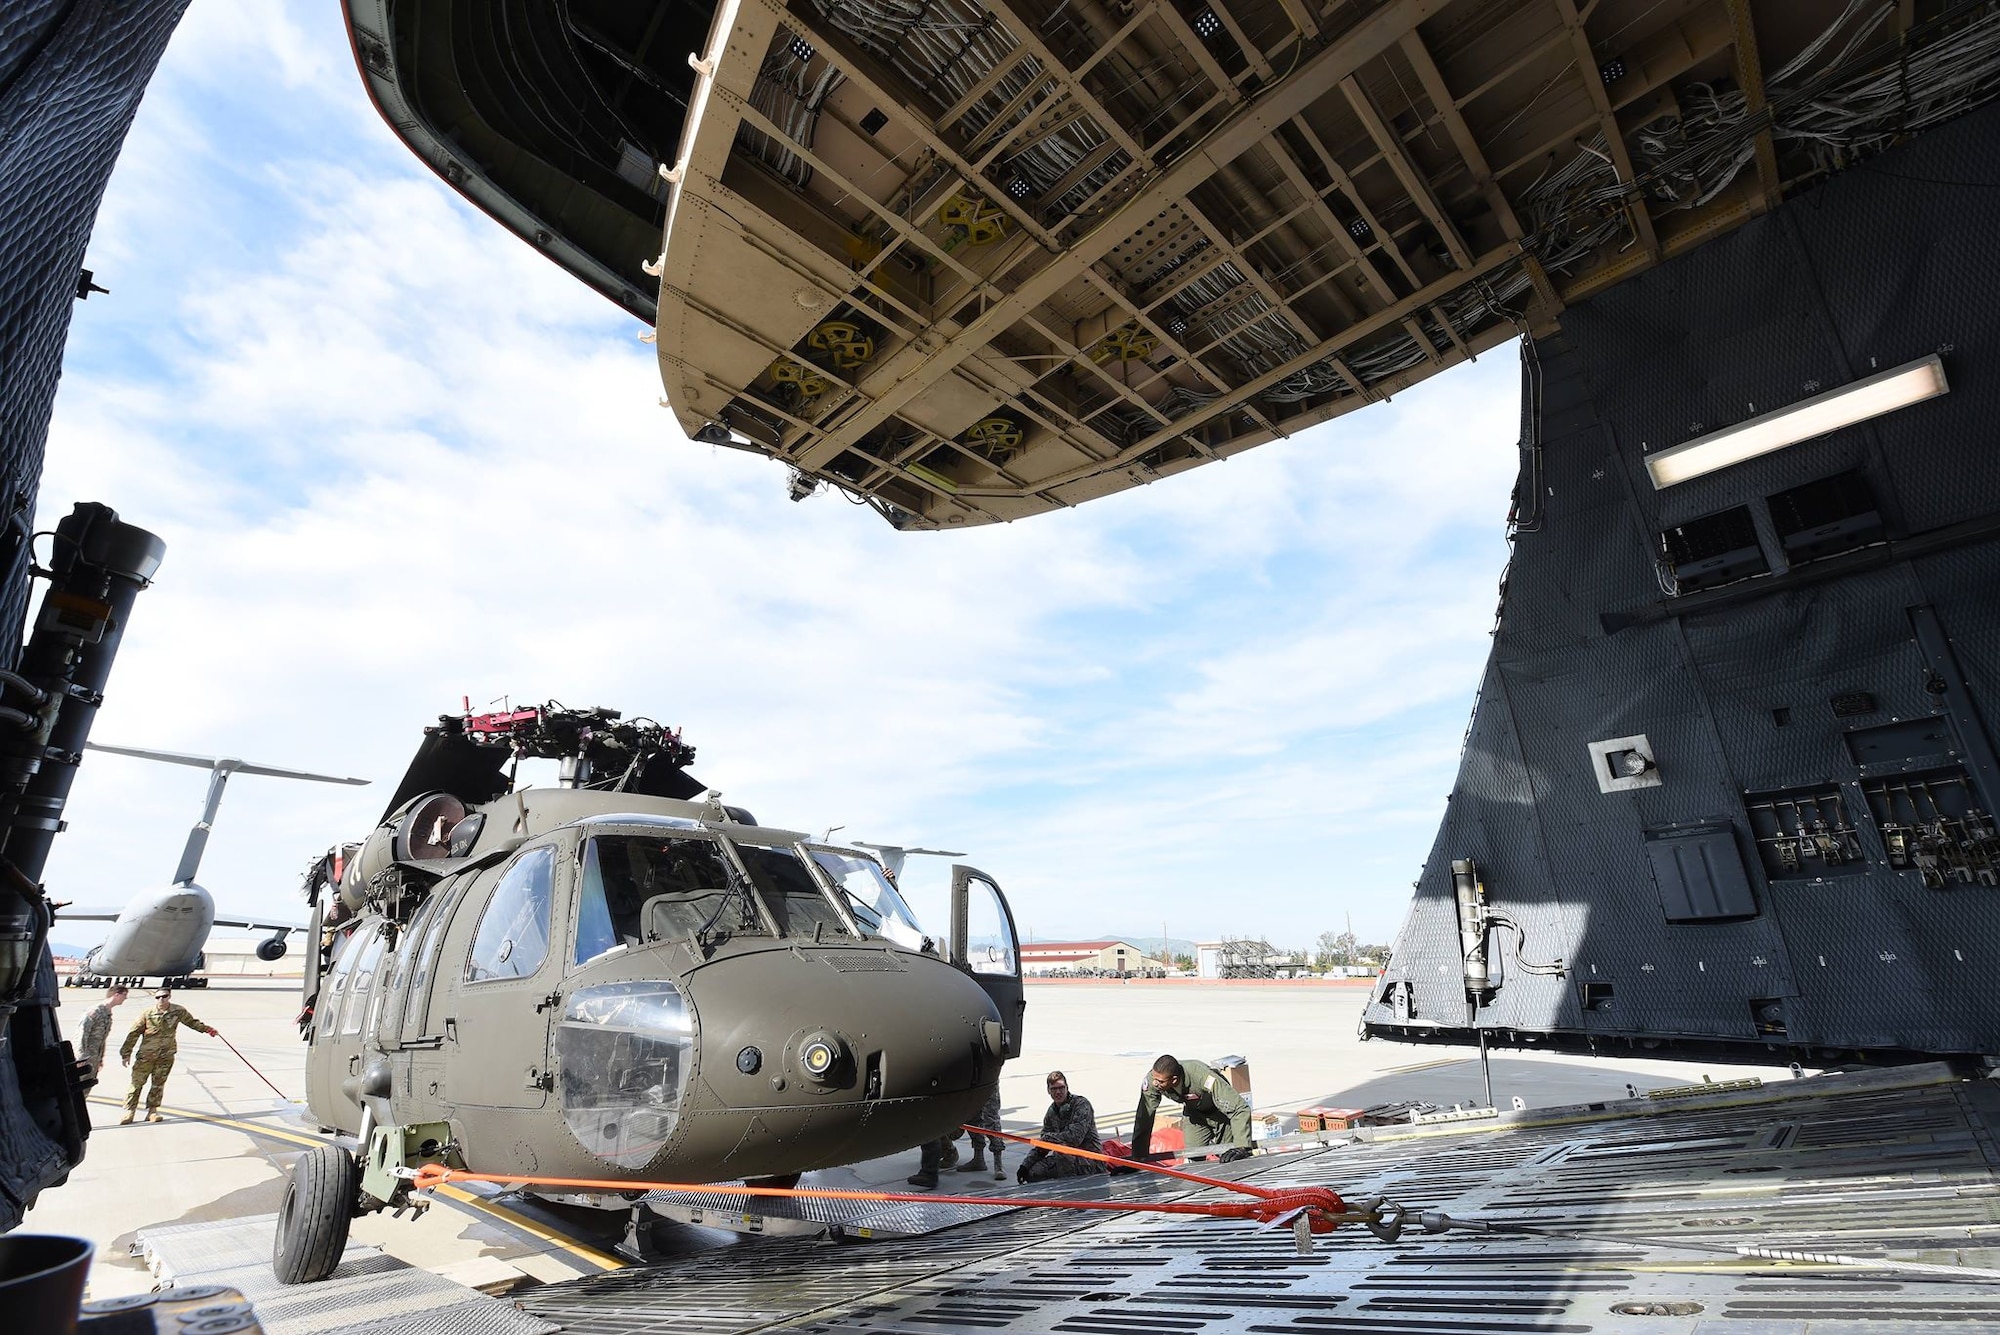 A U.S. Army UH-60 Black Hawk is loaded into a C-5M Super Galaxy as part of full-spectrum readiness training January 13 at Travis Air Force Base, Calif. The Black Hawks’ normal transport is the C-17 Globemaster III, but the C-5M was offered as transport to the Army in the interest of full-spectrum readiness training for Travis’ C-5M personnel. (U.S. Air Force photo by Airman 1st Class Christian Conrad)